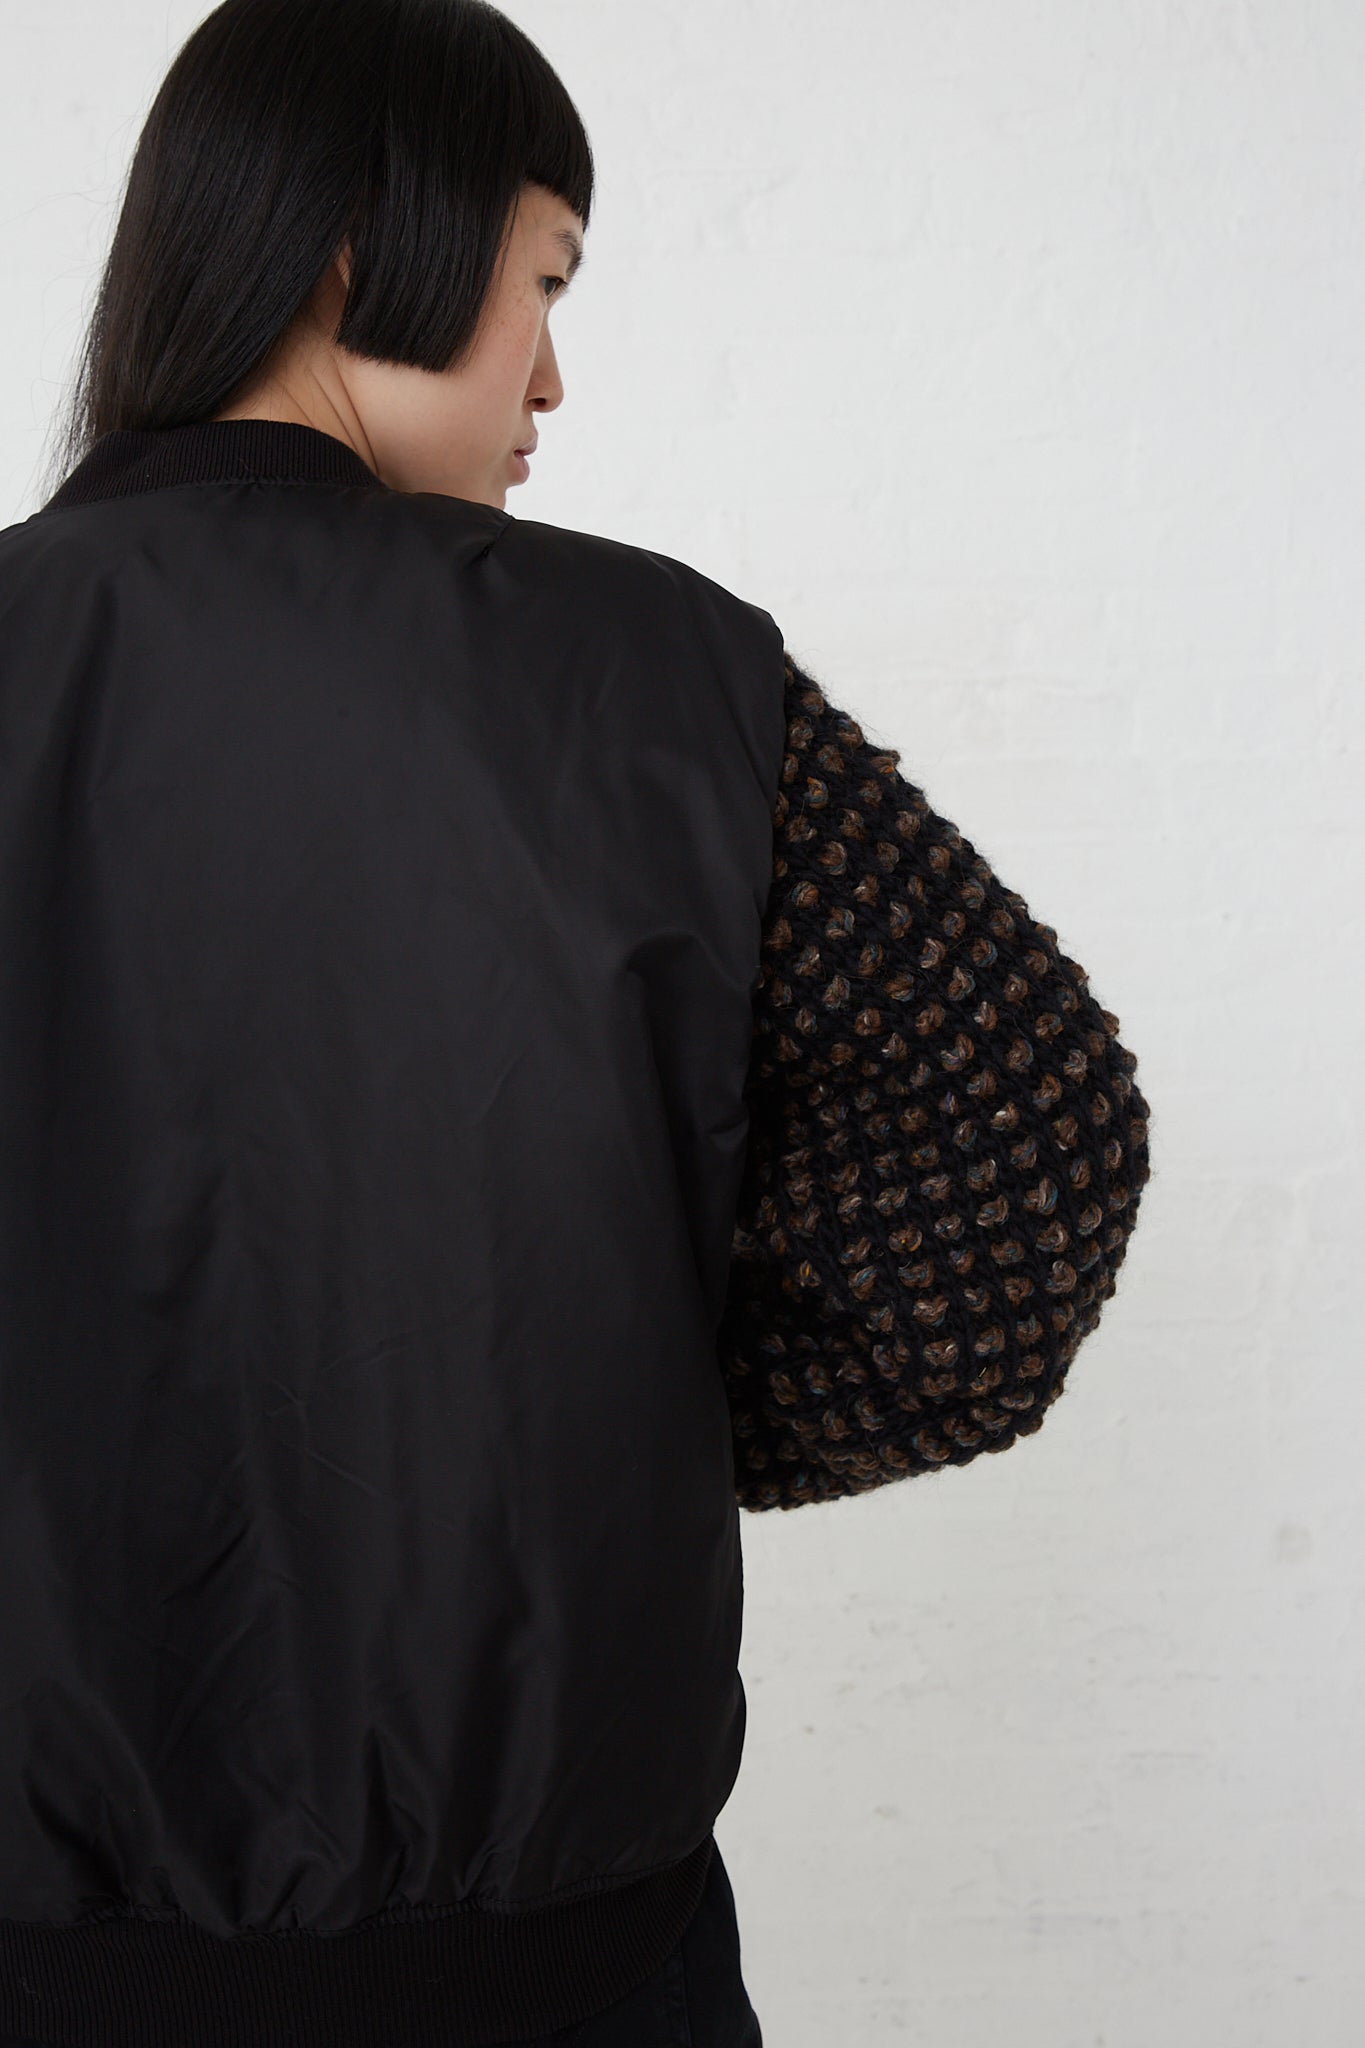 The woman dons an oversized black Sleeve Bomber No. 70 made from a nylon and wool blend fabric. Back view.